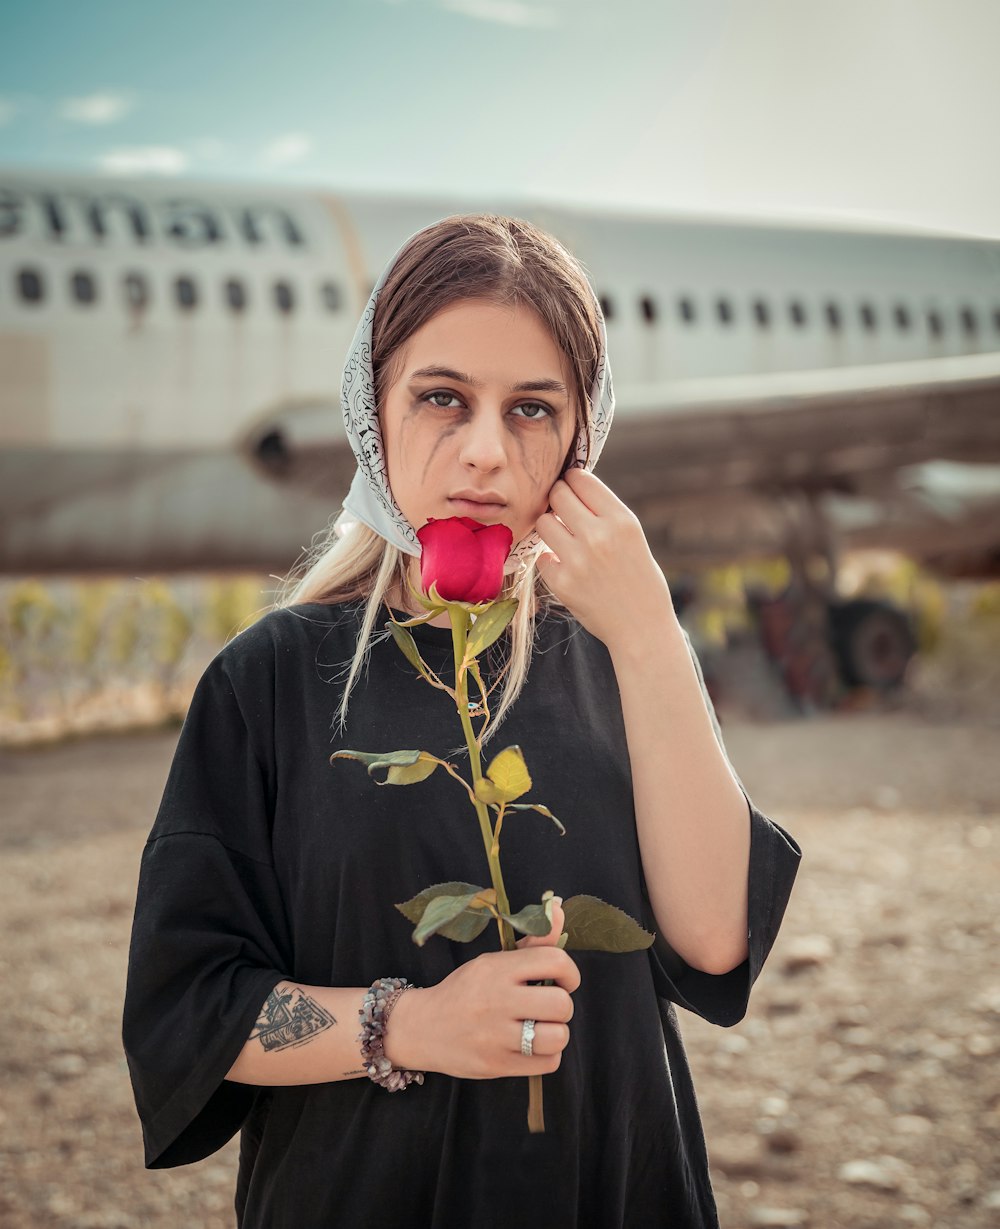 a woman holding a rose in front of an airplane